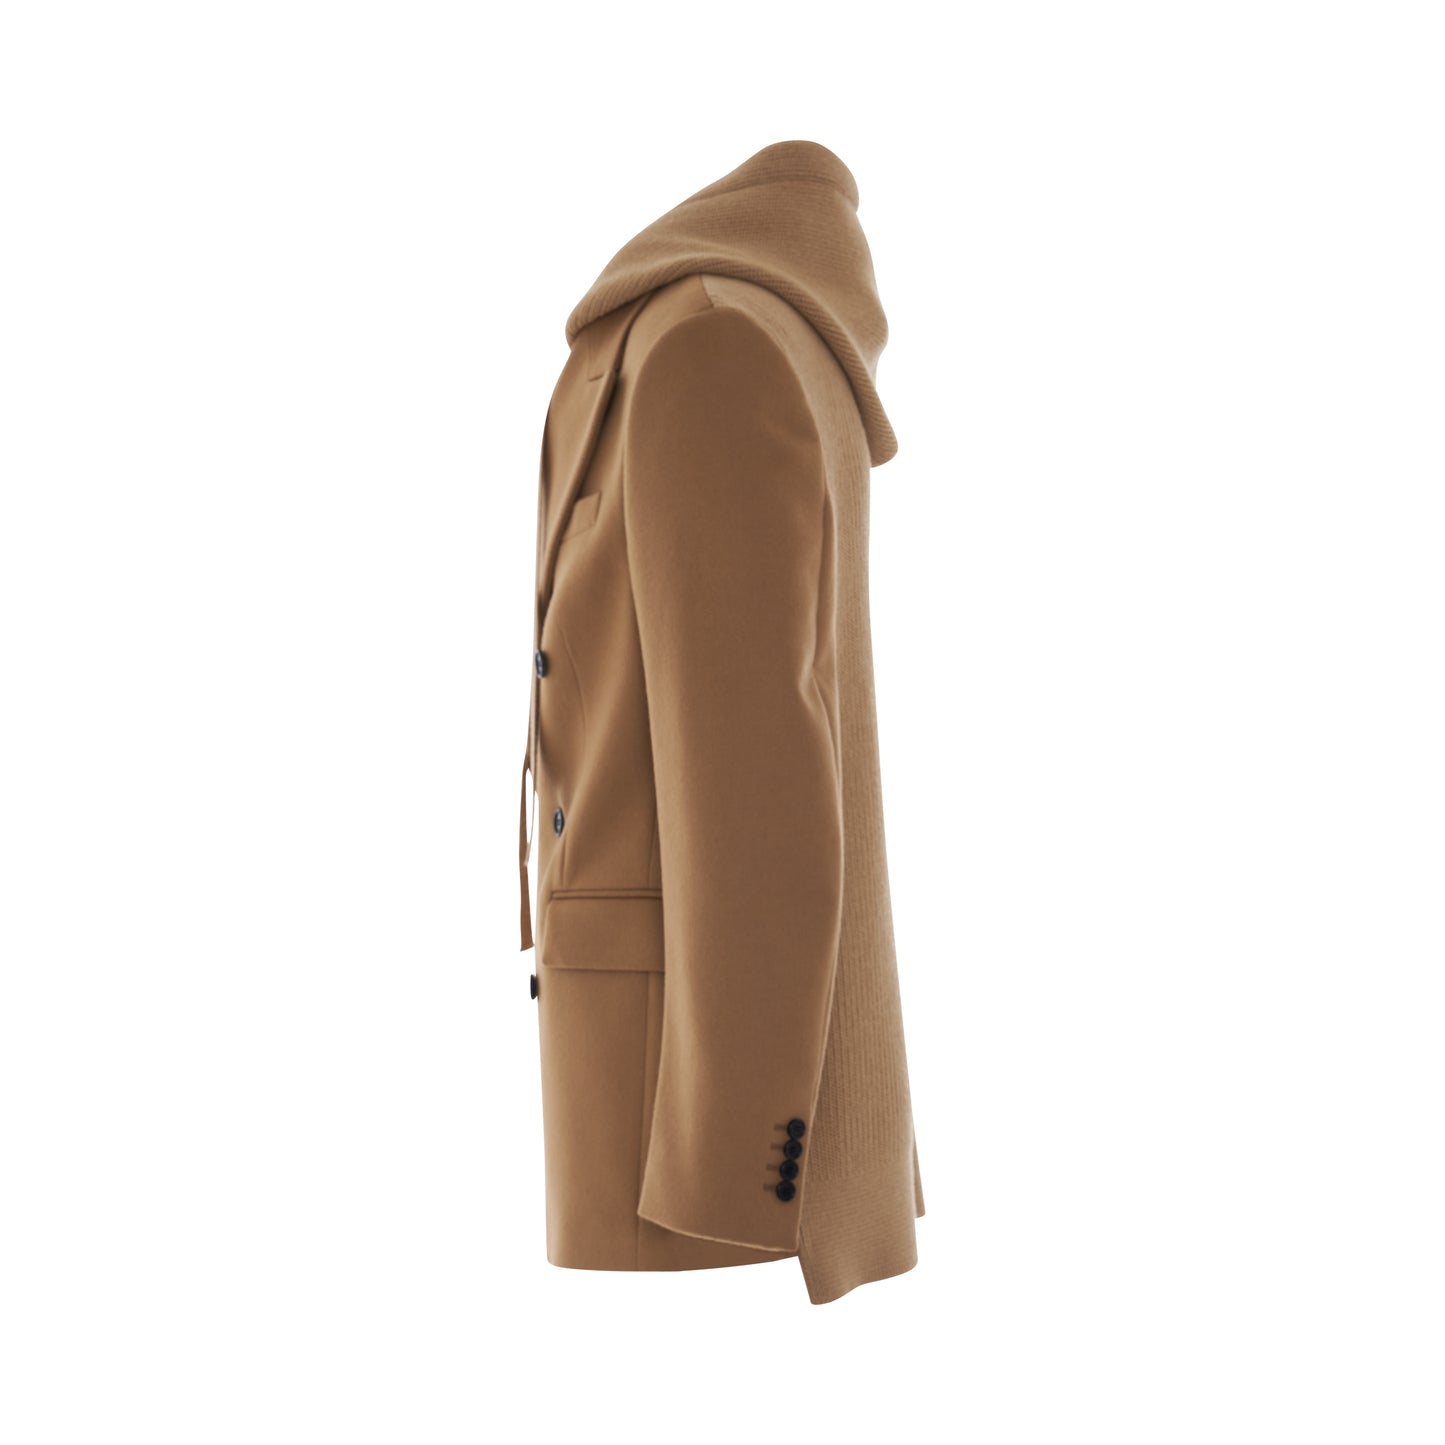 Double Breasted Hooded Jacket in Camel